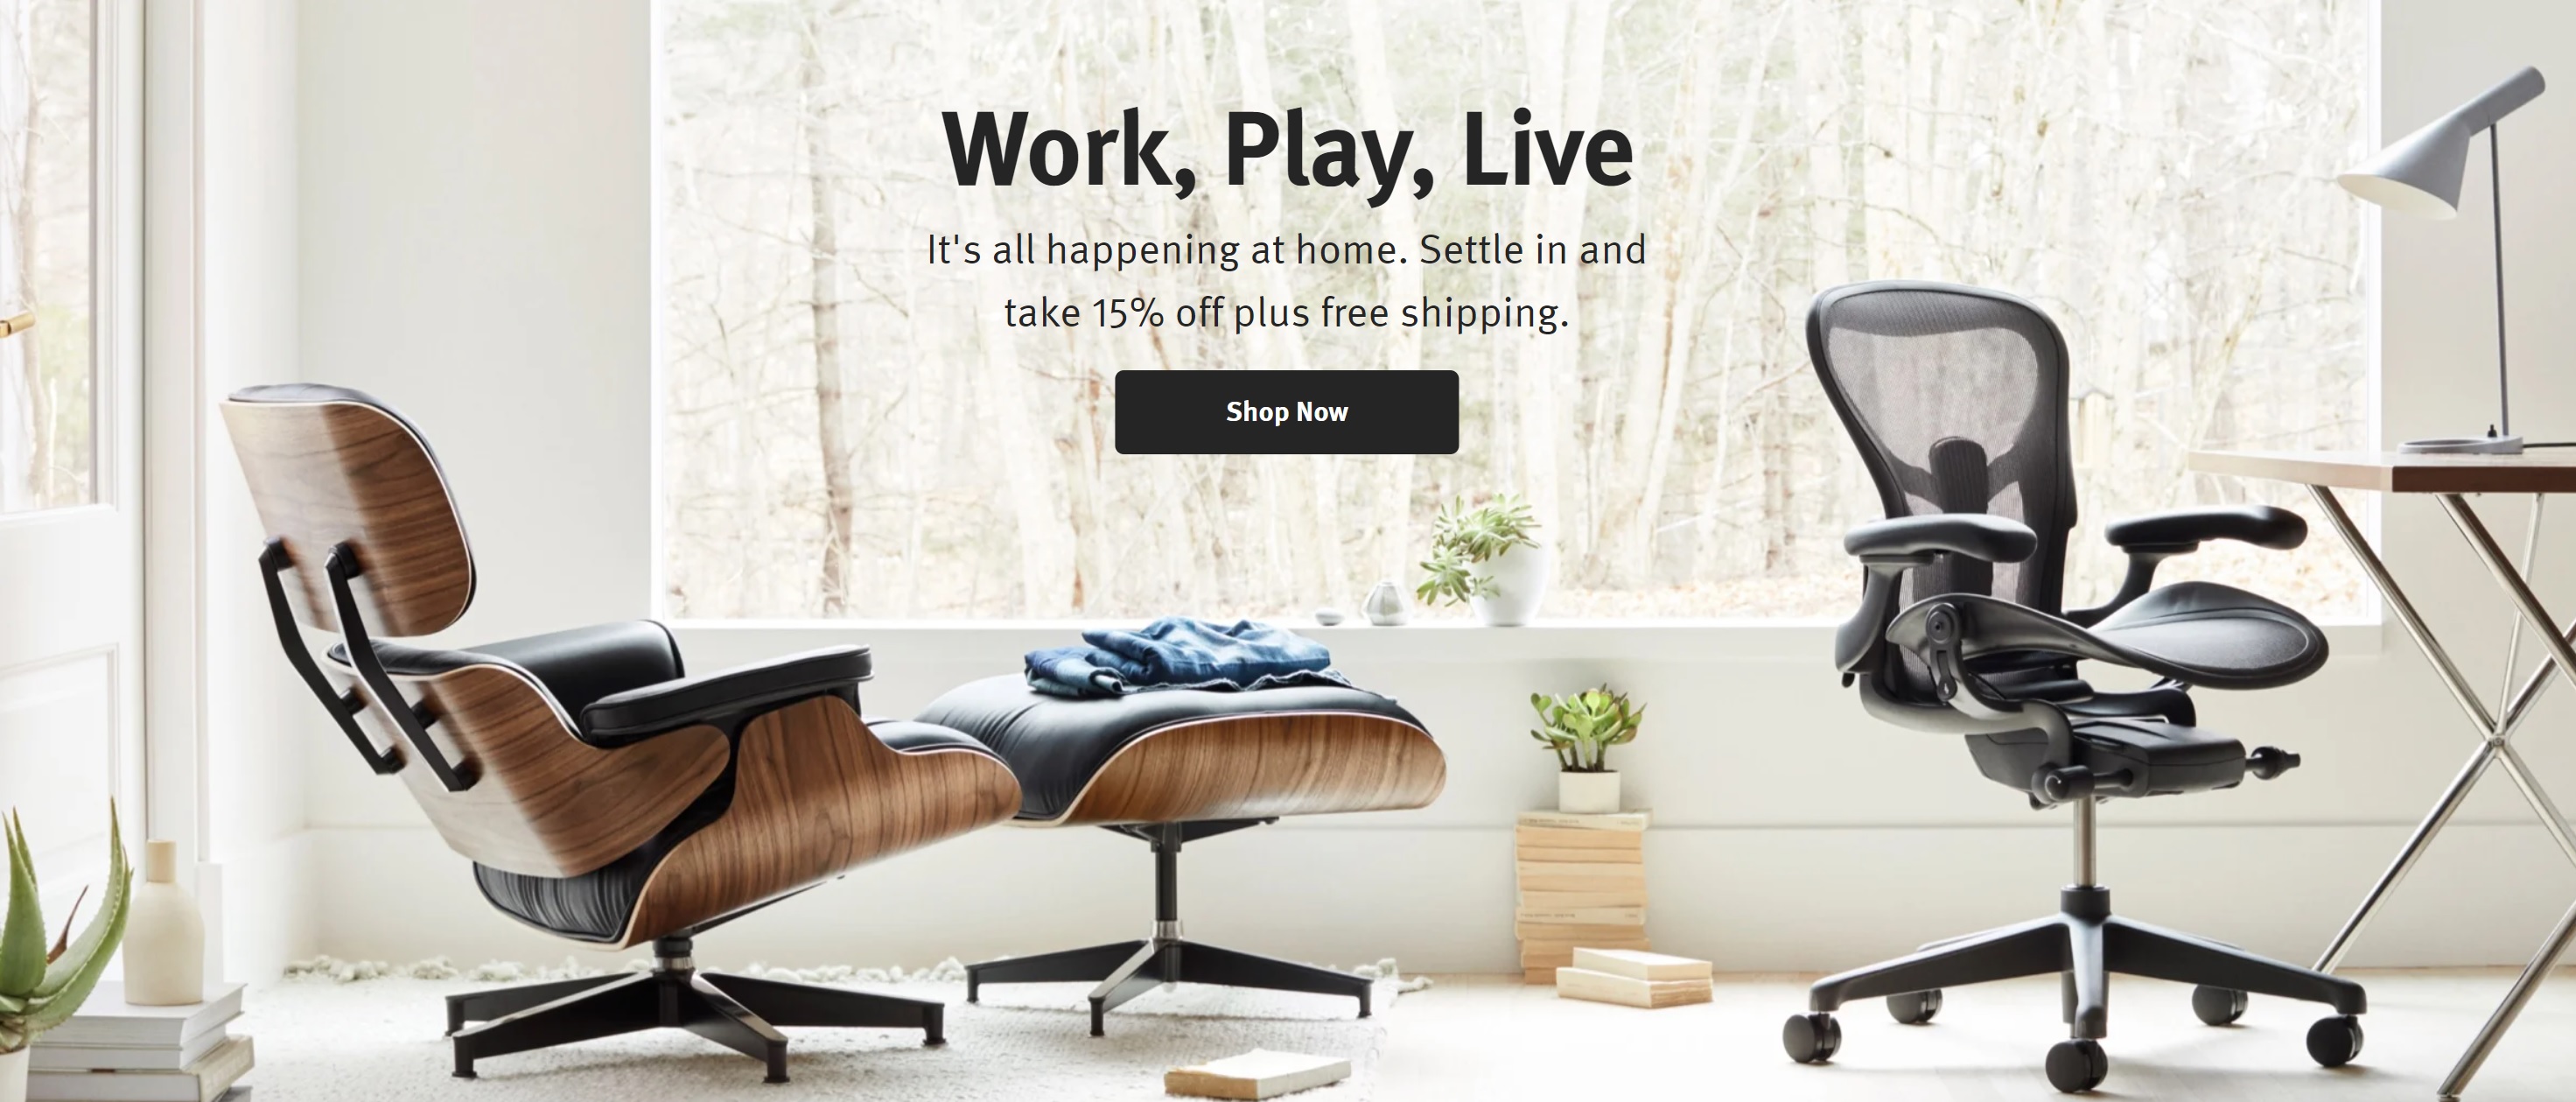 Herman Miller Canada Spring Sale: Save OFF Many Items + FREE Shipping - Canadian Freebies, Deals, Bargains, Flyers, Contests Canada Canadian Freebies, Coupons, Bargains, Flyers, Canada